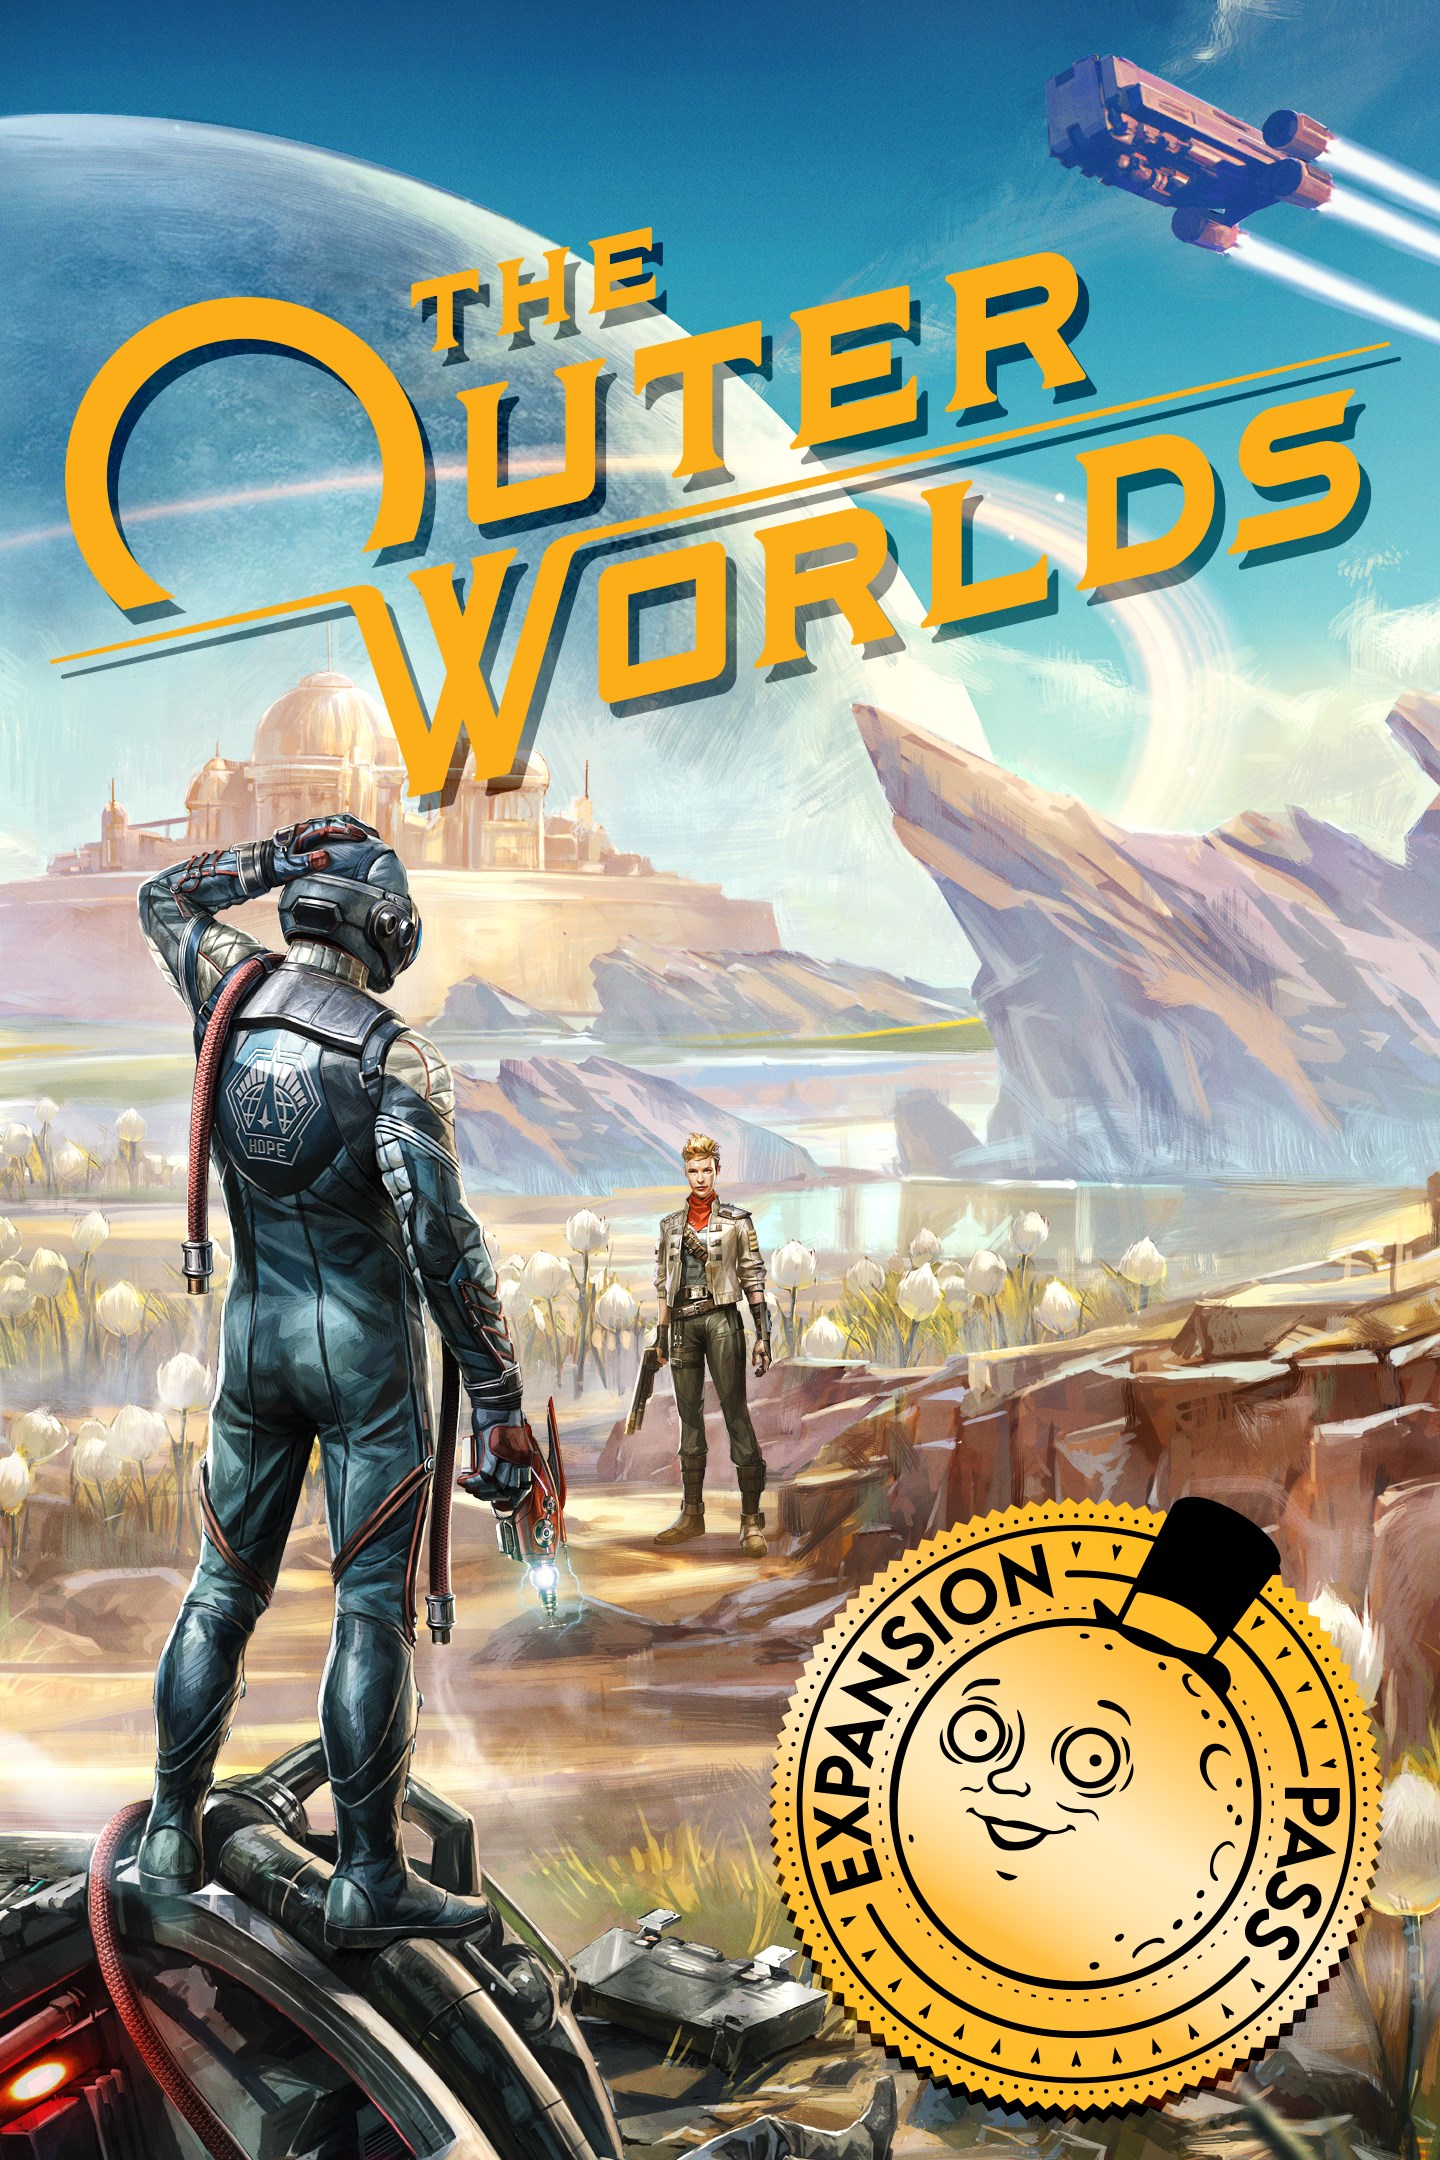 El juego Xbox One de The Outer Worlds 